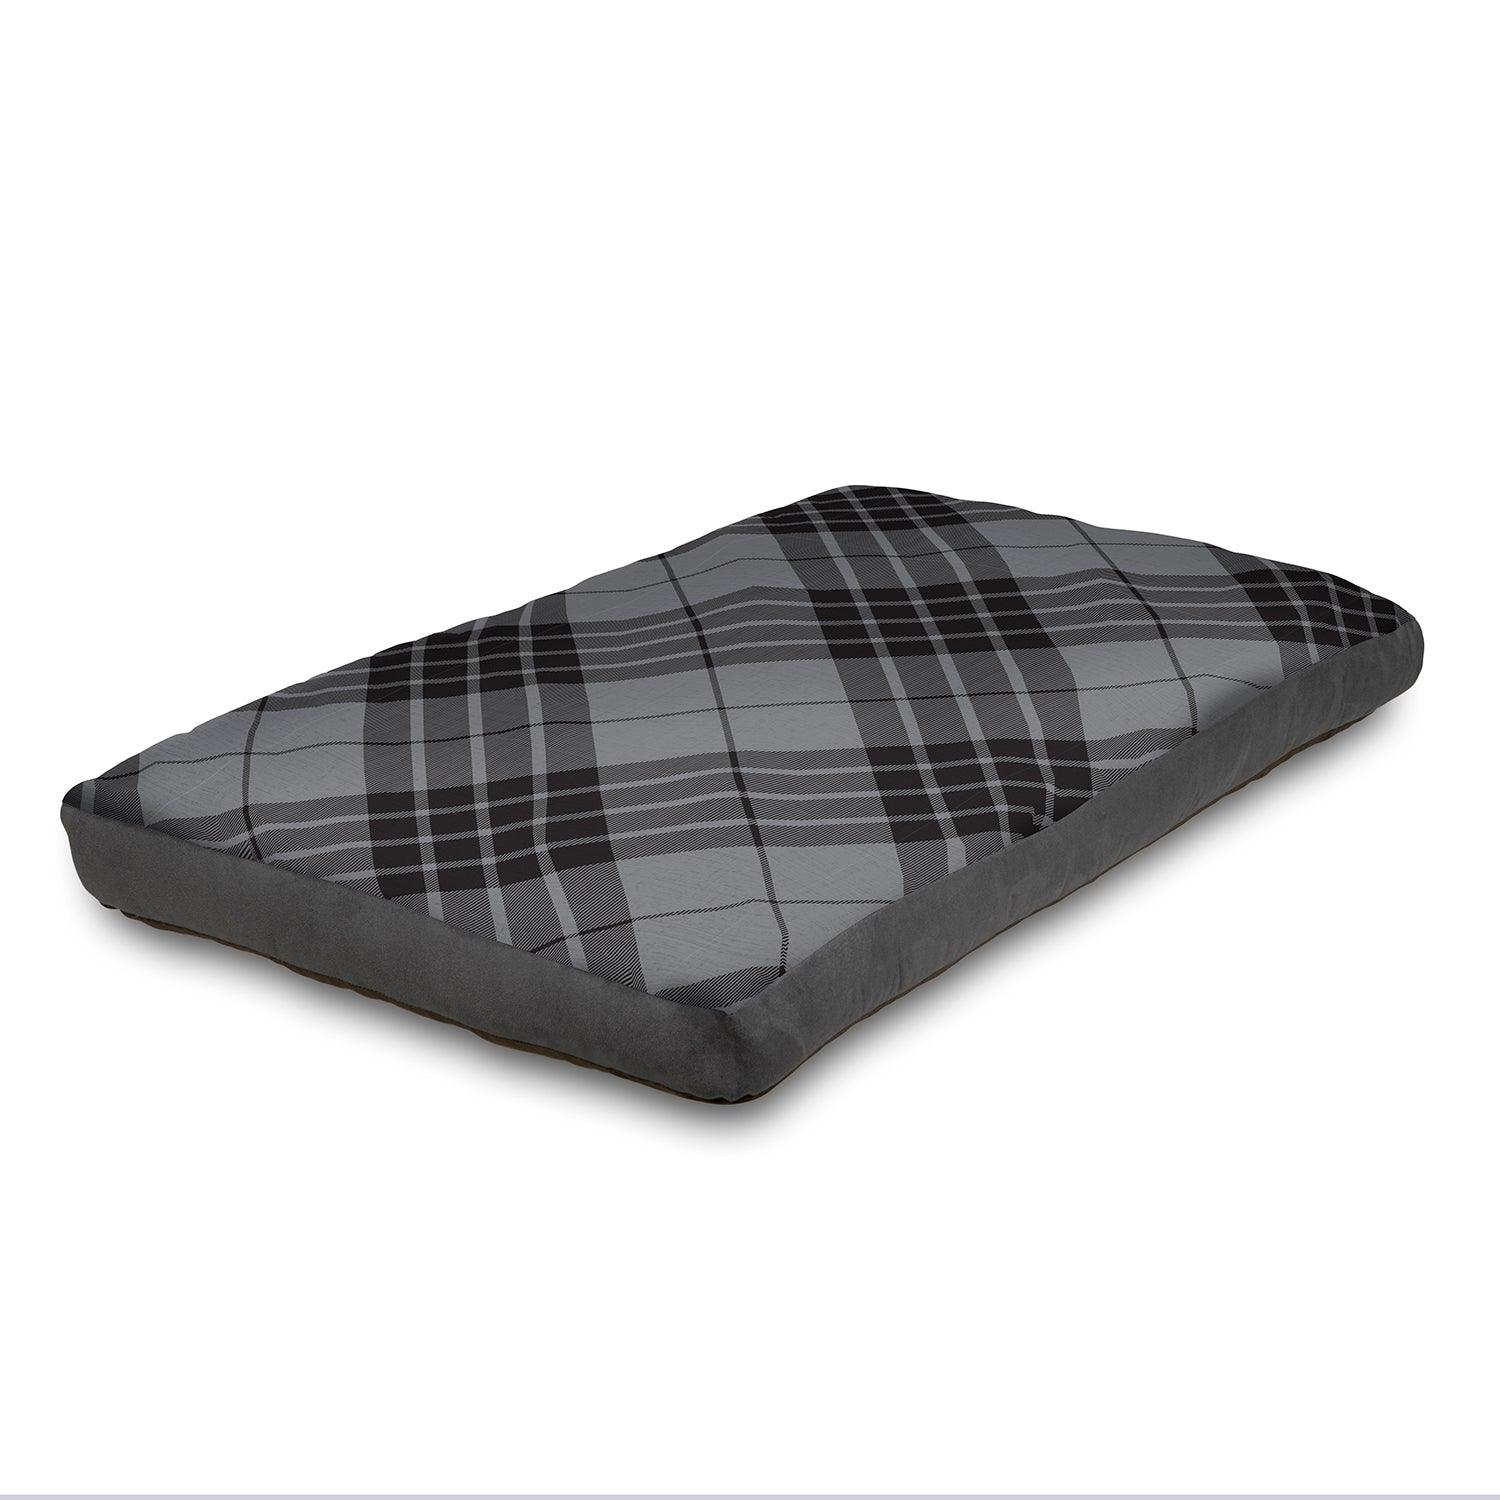 View Super Comfy Dog Bed Soft and Fluffy with Washable Cover Small 75 x 50 cm Black information